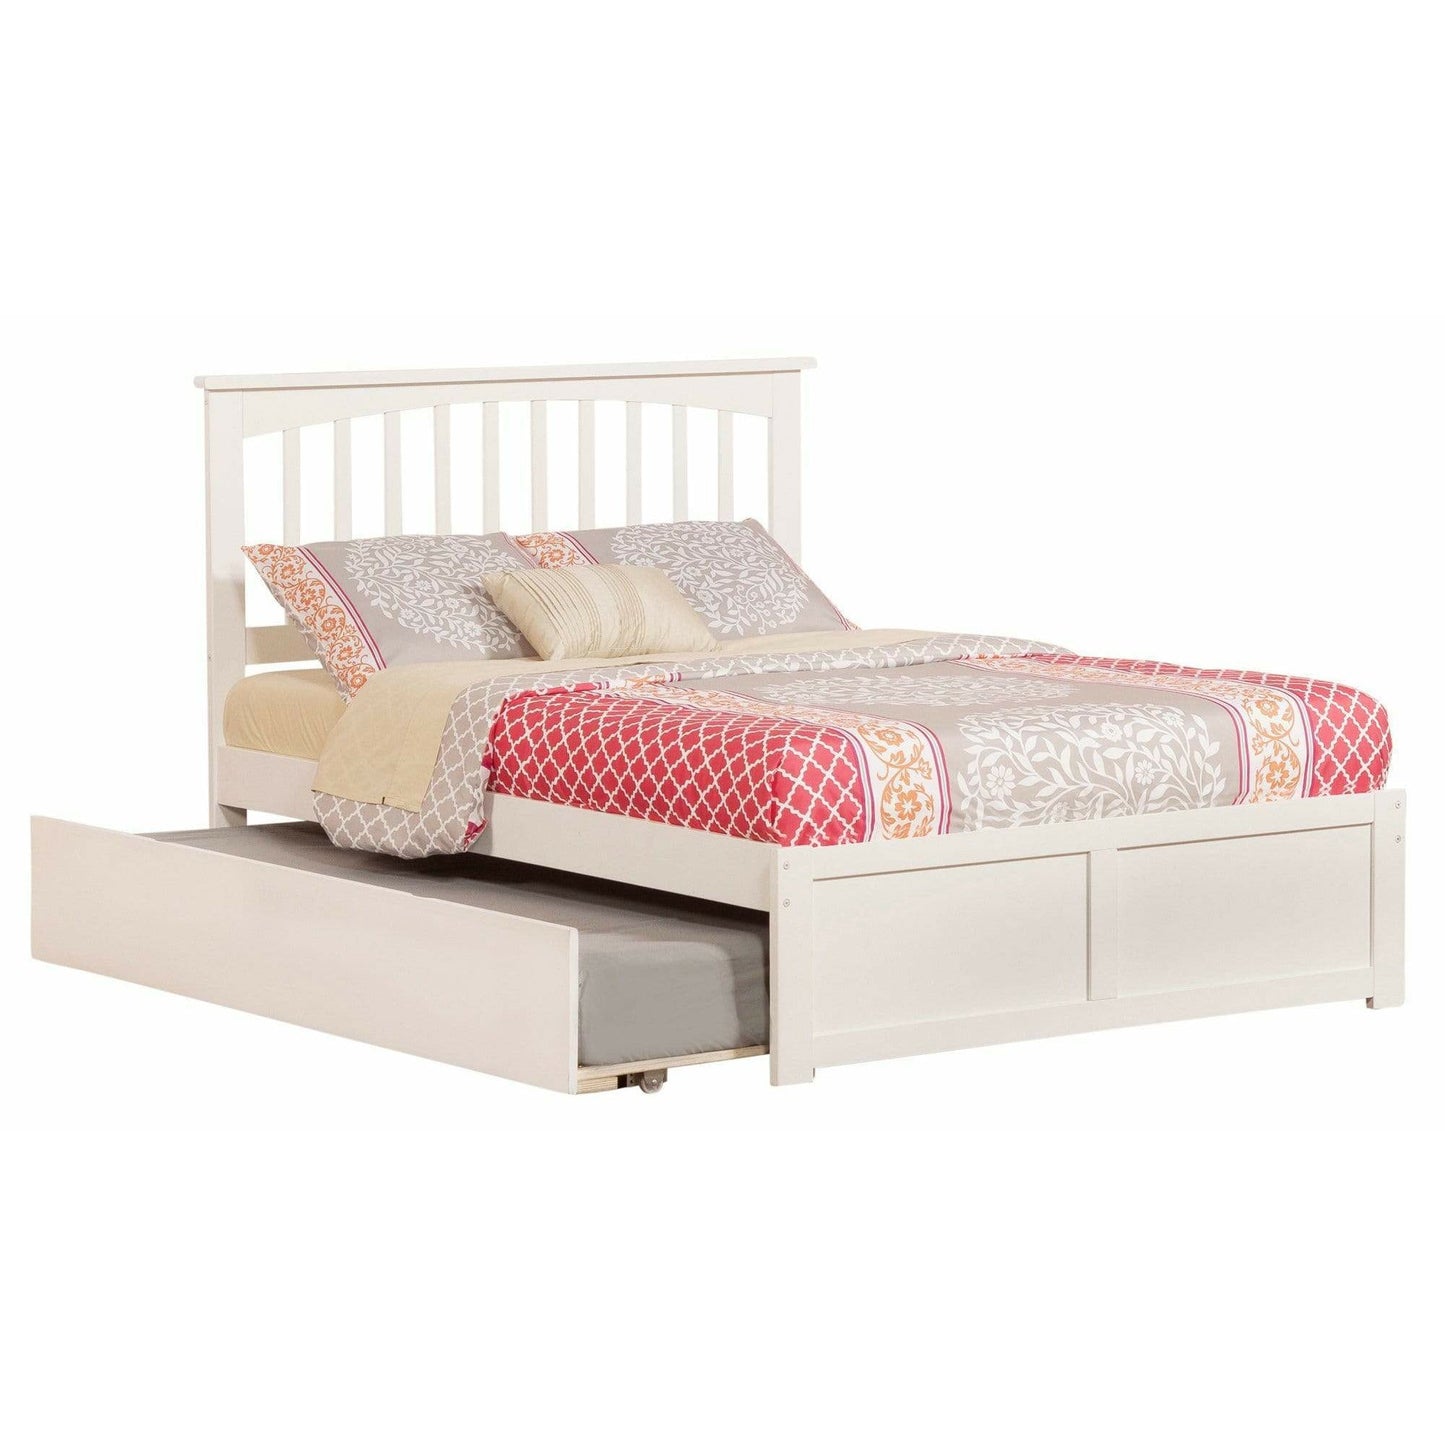 Atlantic Furniture Bed Mission Full Platform Bed with Flat Panel Foot Board and Full Size Urban Trundle Bed in Espresso